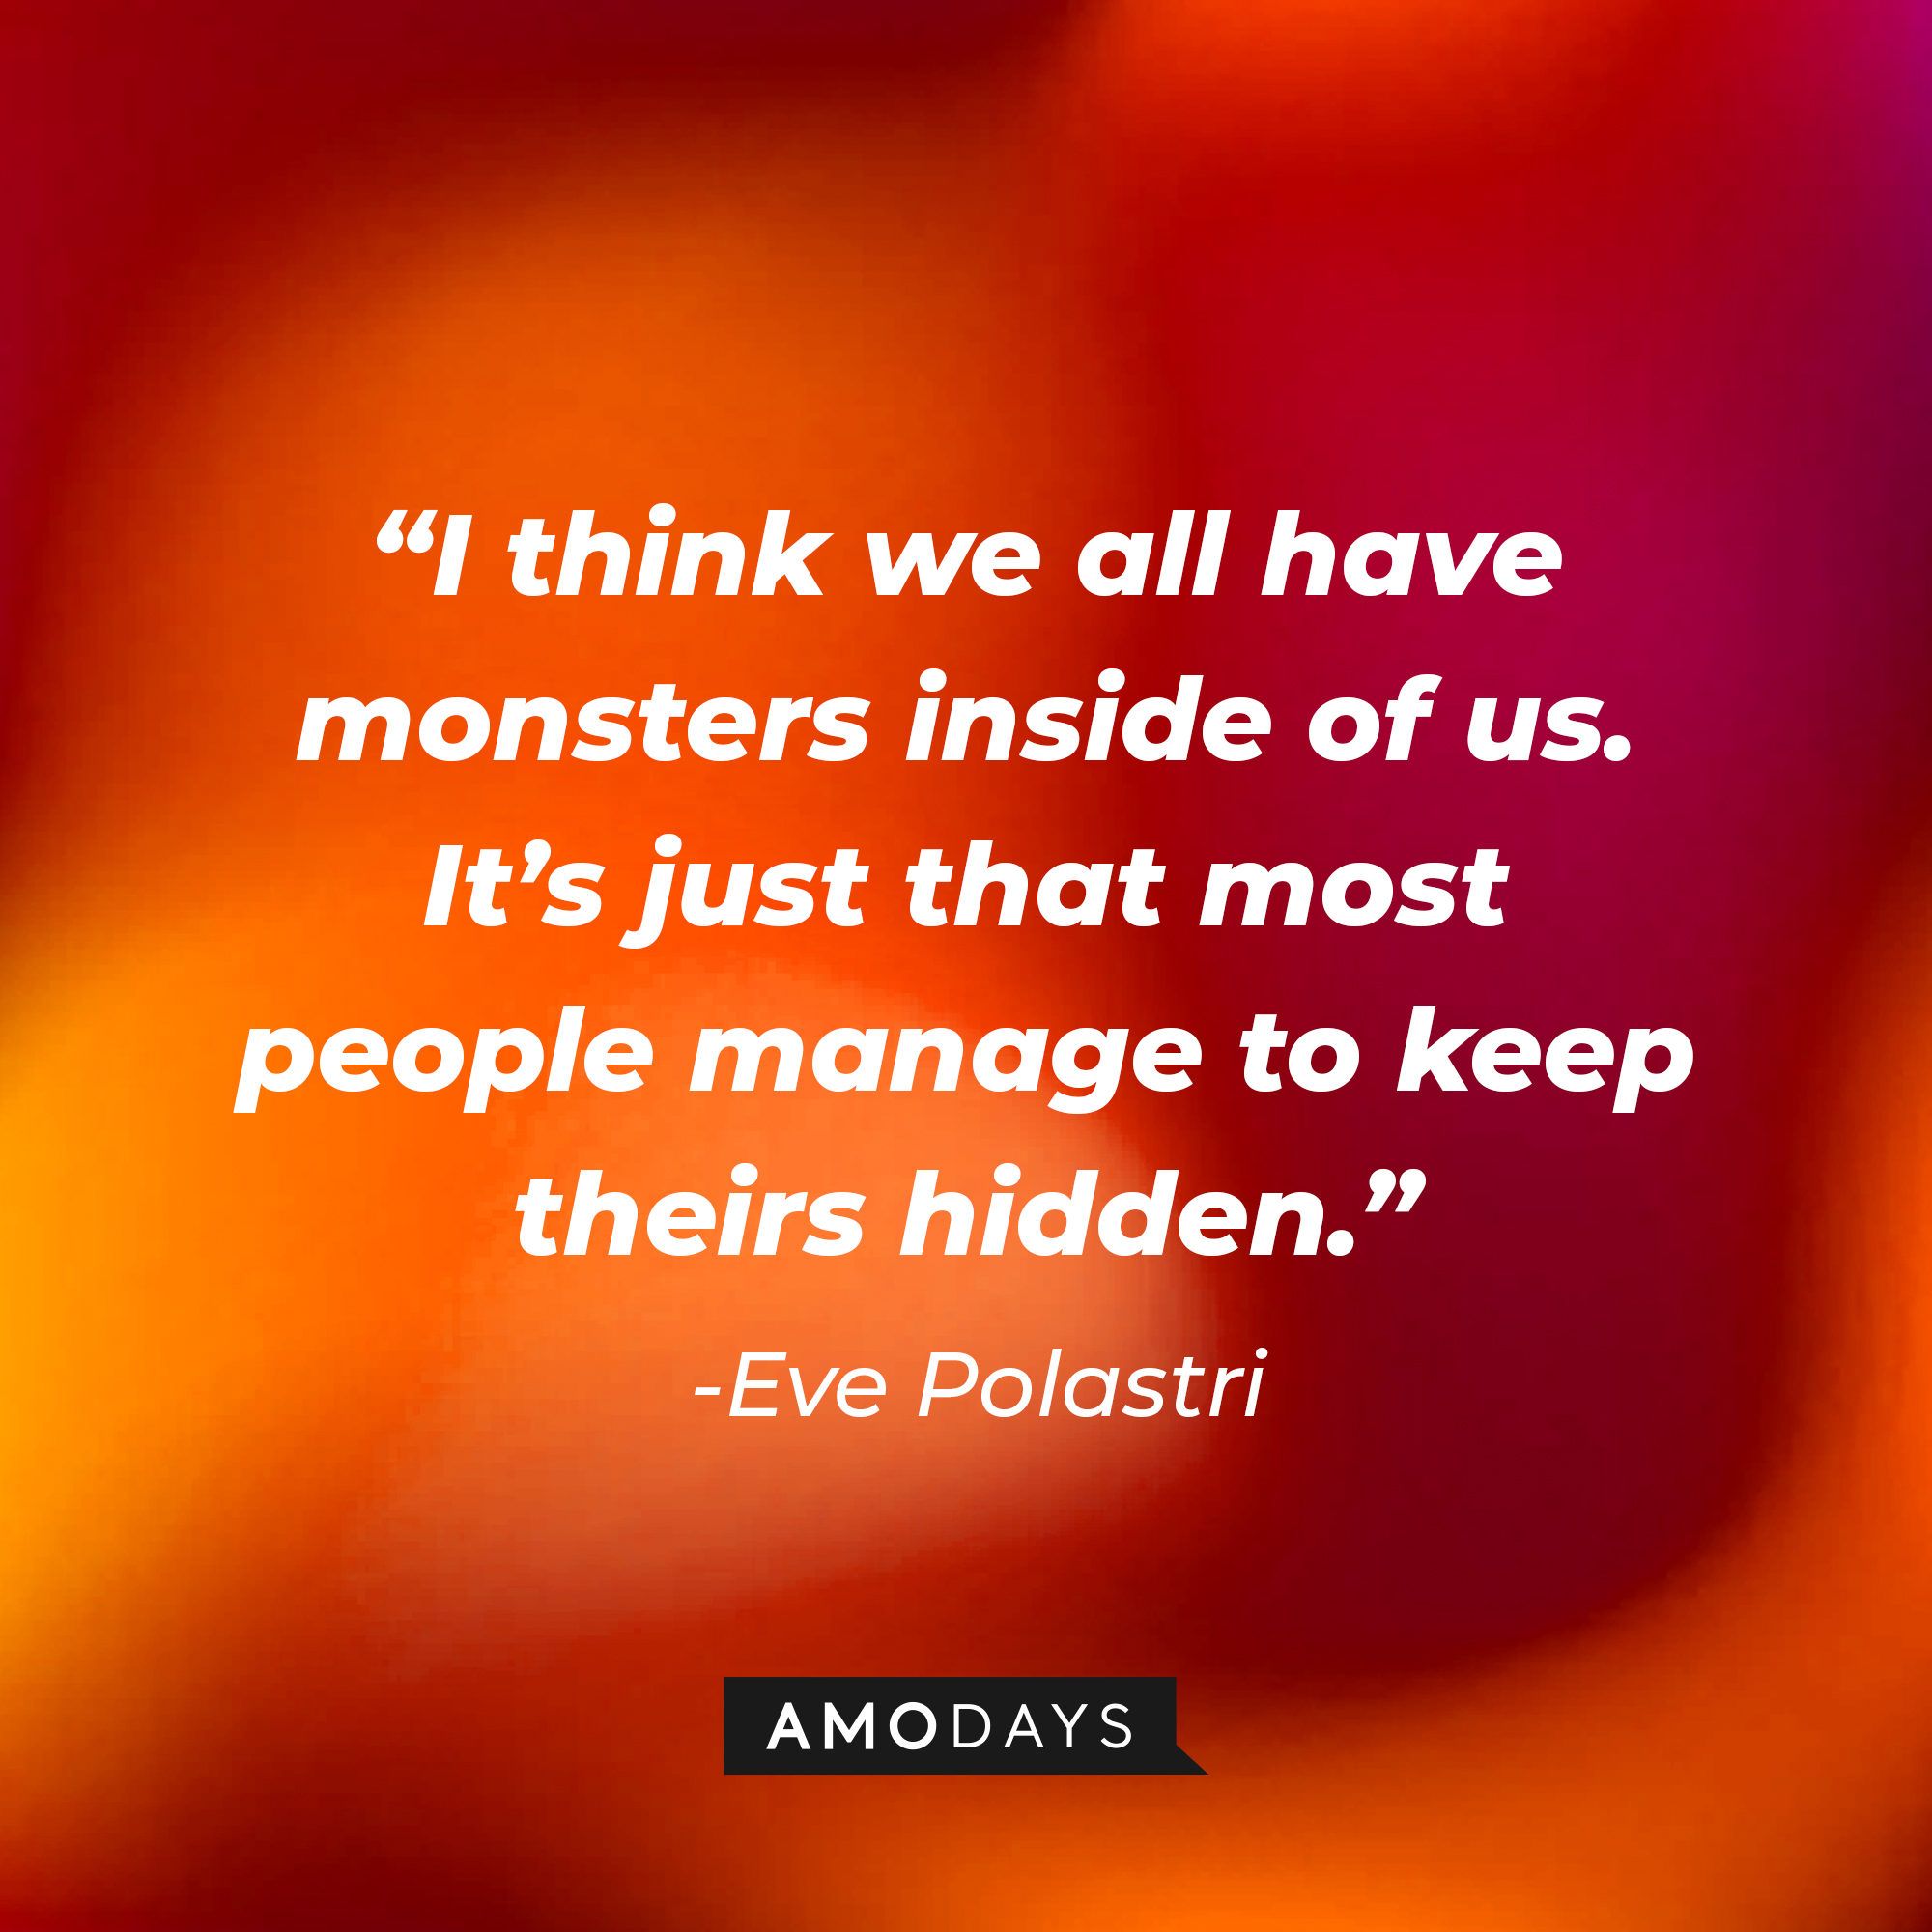 Eve Polastri’s quote: “I think we all have monsters inside of us. It’s just that most people manage to keep theirs hidden.” | Source: AmoDays